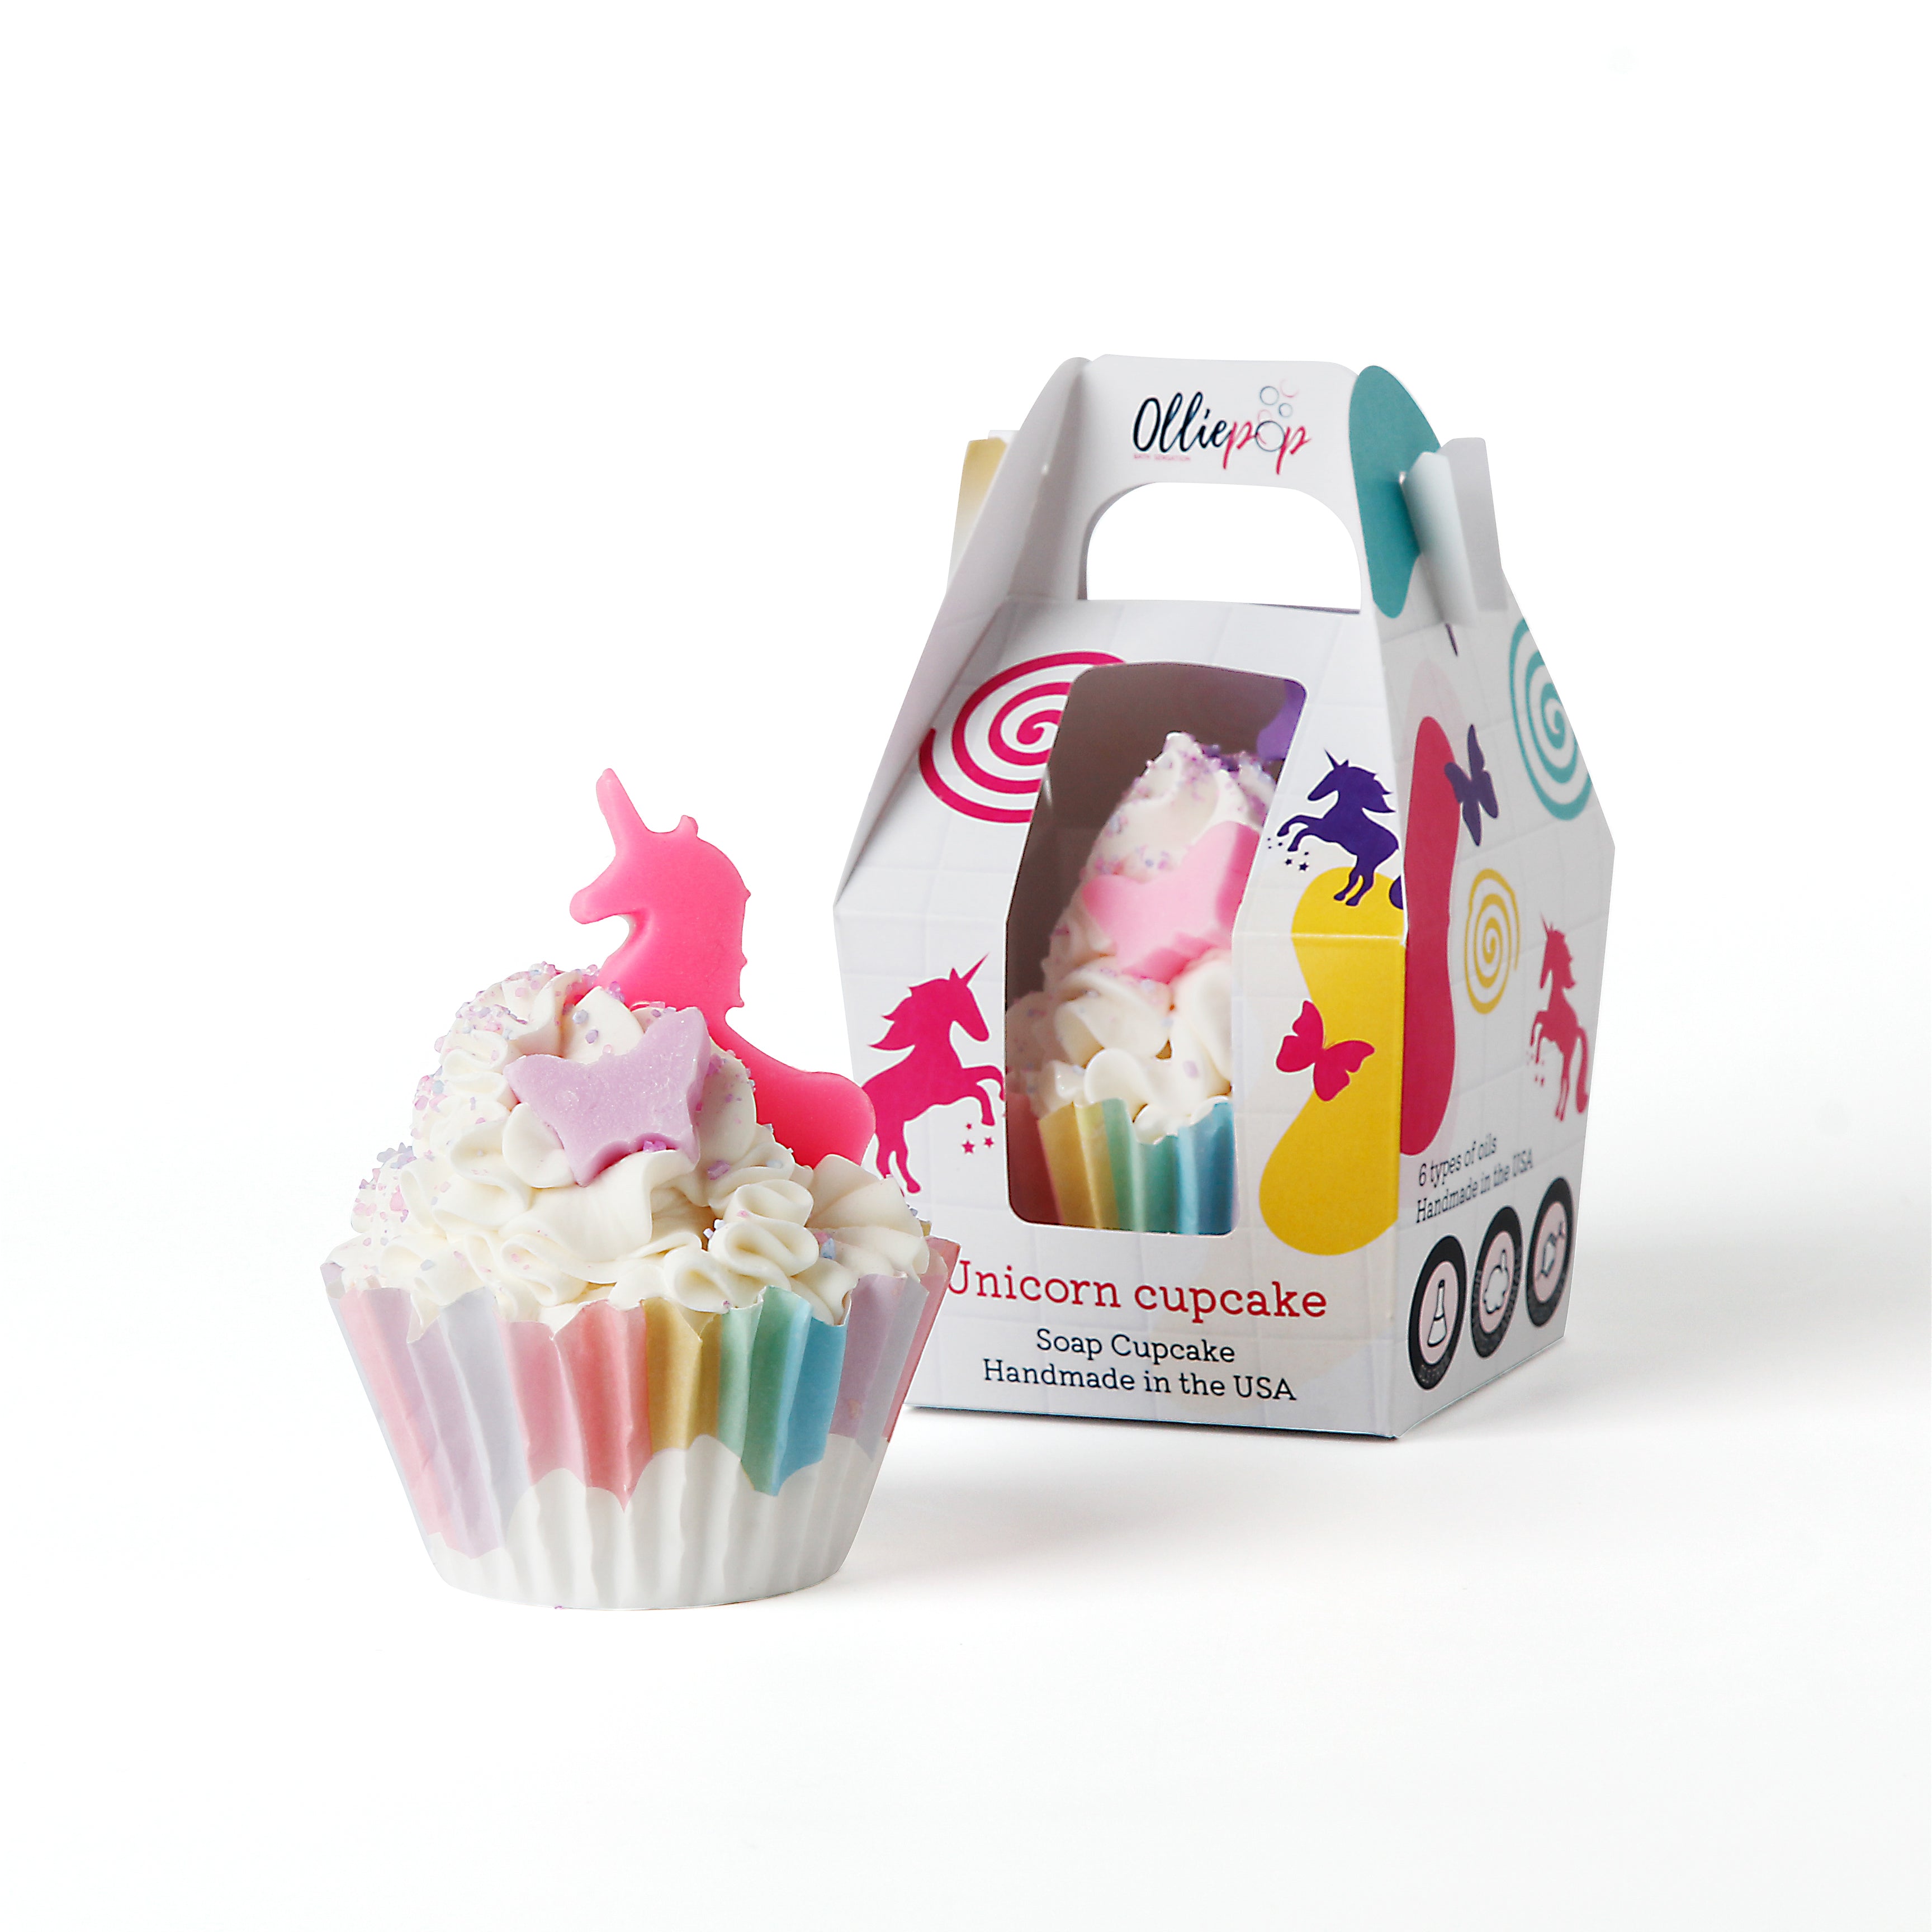 Unicorn themed soap shaped like a decadent cupcake. A rainbow cupcake liner with clouds. Inside is soap frosting with pastel sprinkles and a light purple butterfly cut out and a pink unicorn cut out, on top. packaged with our customized Olliepop packaging, perfect for gifts.